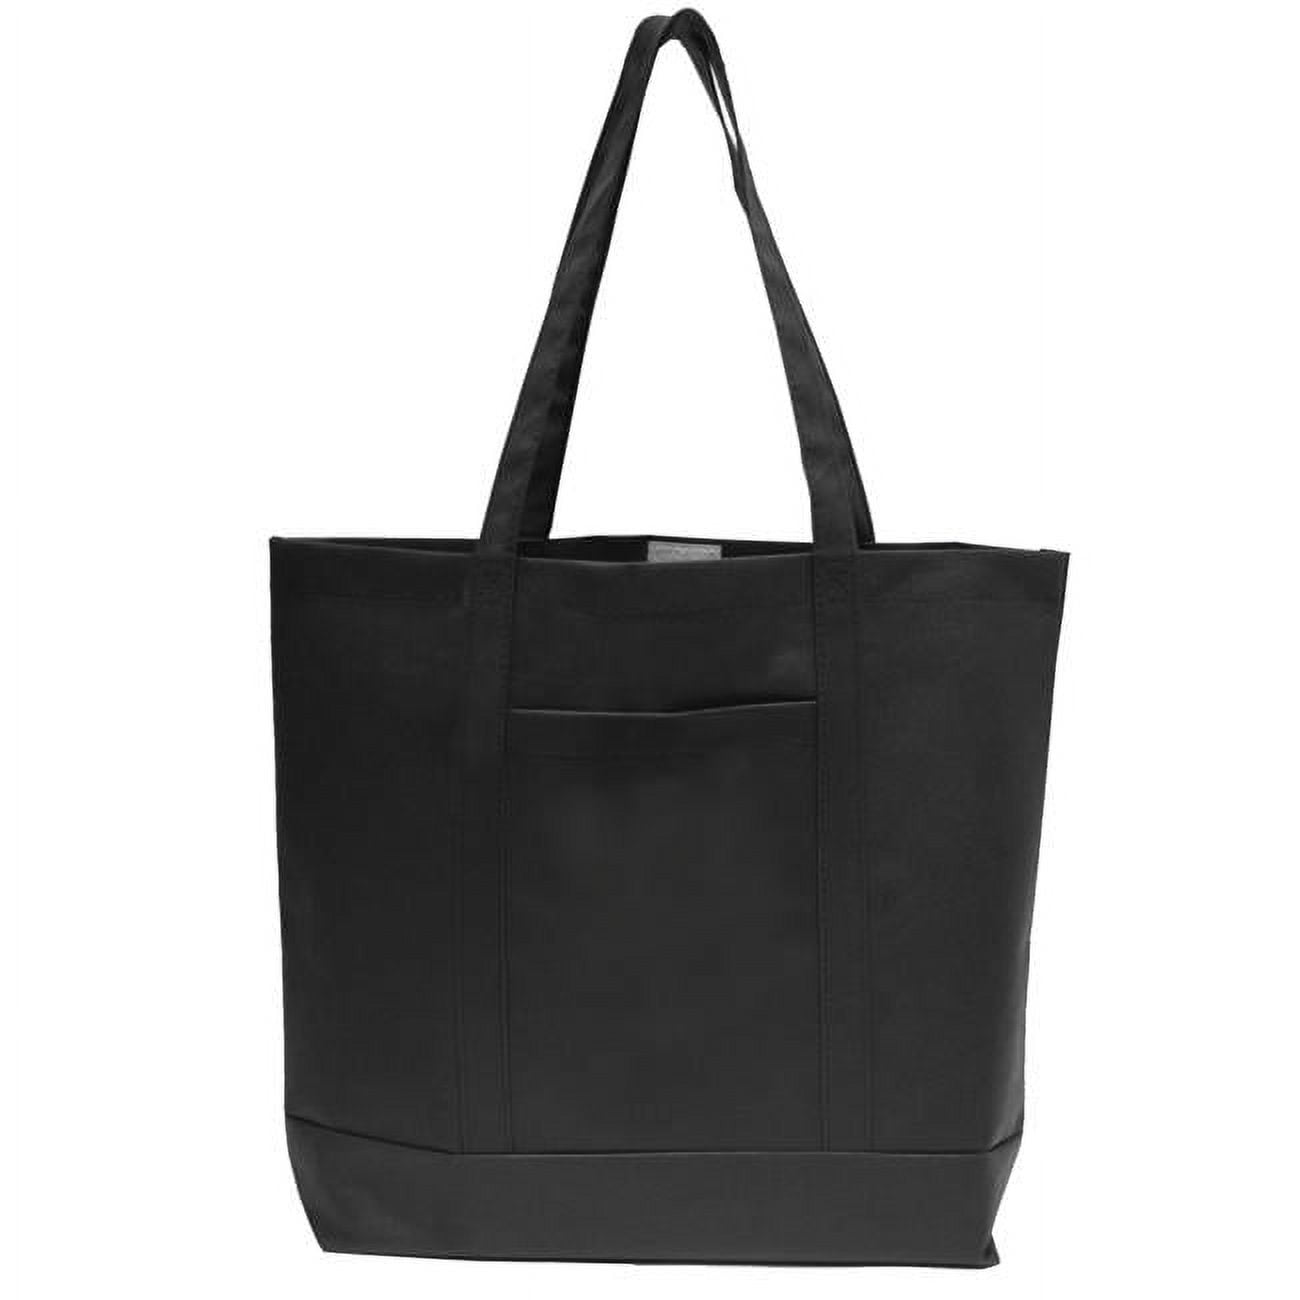 Nw301blk Non Woven Tote With Pocket, Black - 10 Pack